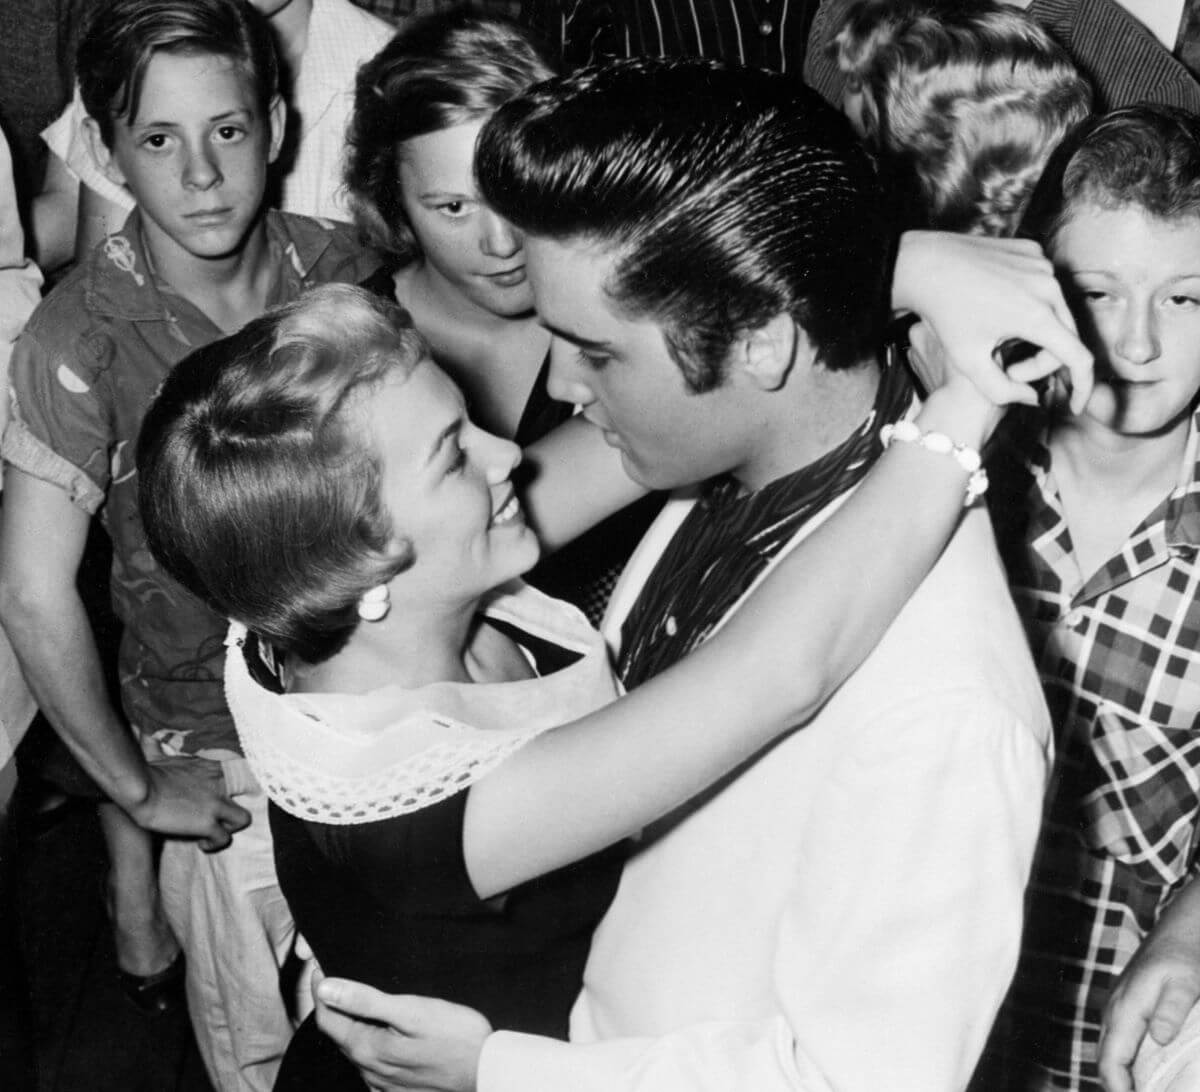 A black and white picture of Elvis Presley and Anita Wood dancing in a crowd together.